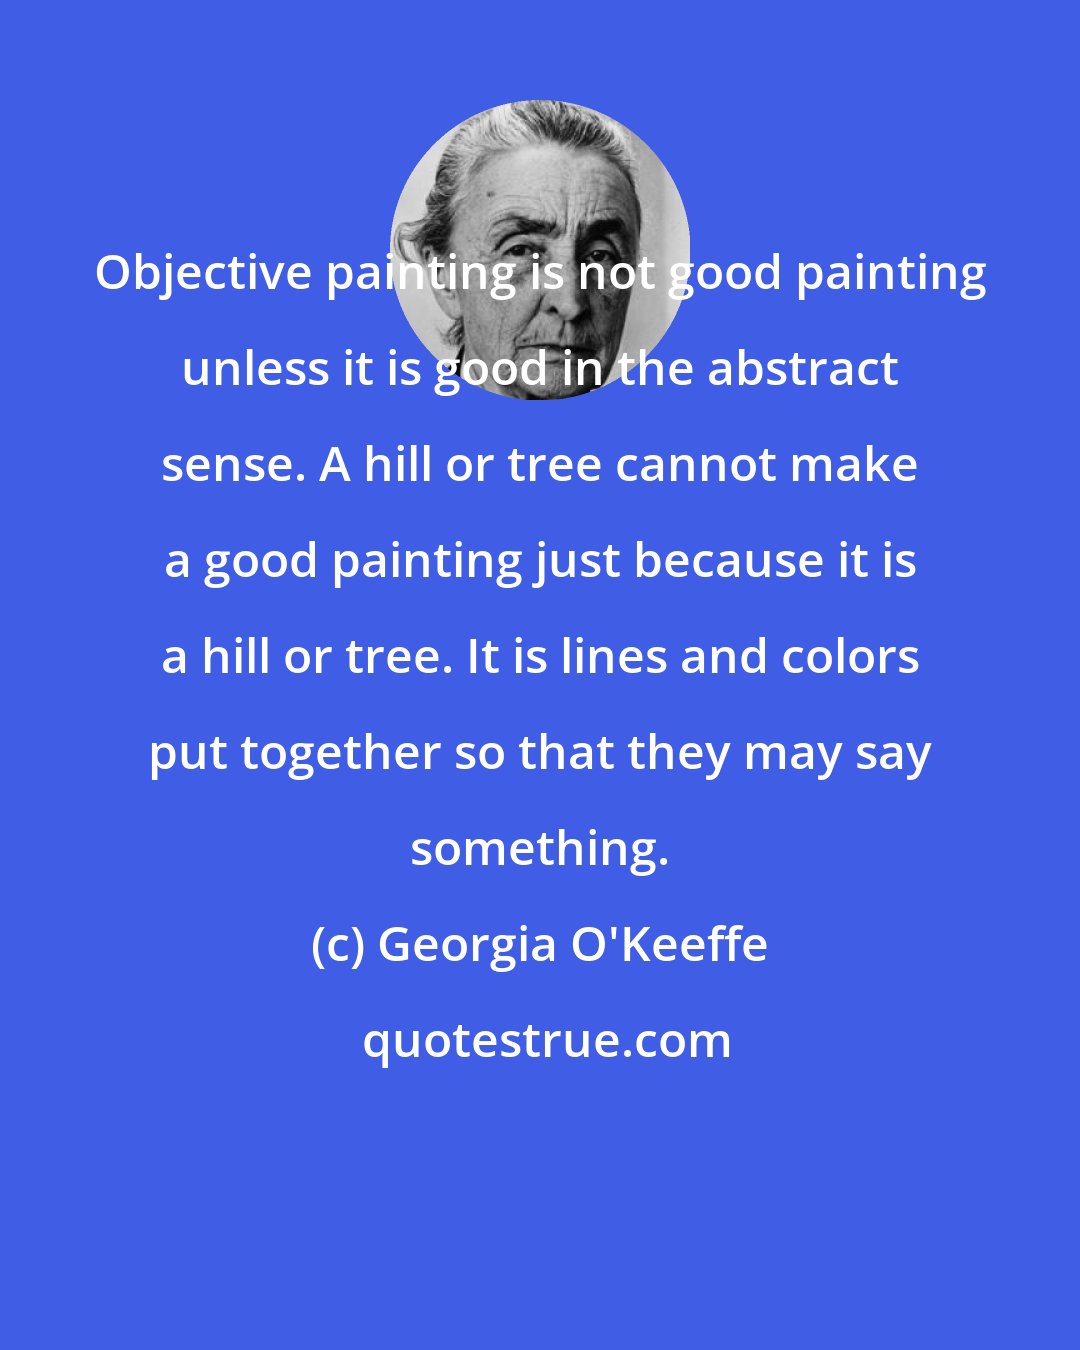 Georgia O'Keeffe: Objective painting is not good painting unless it is good in the abstract sense. A hill or tree cannot make a good painting just because it is a hill or tree. It is lines and colors put together so that they may say something.